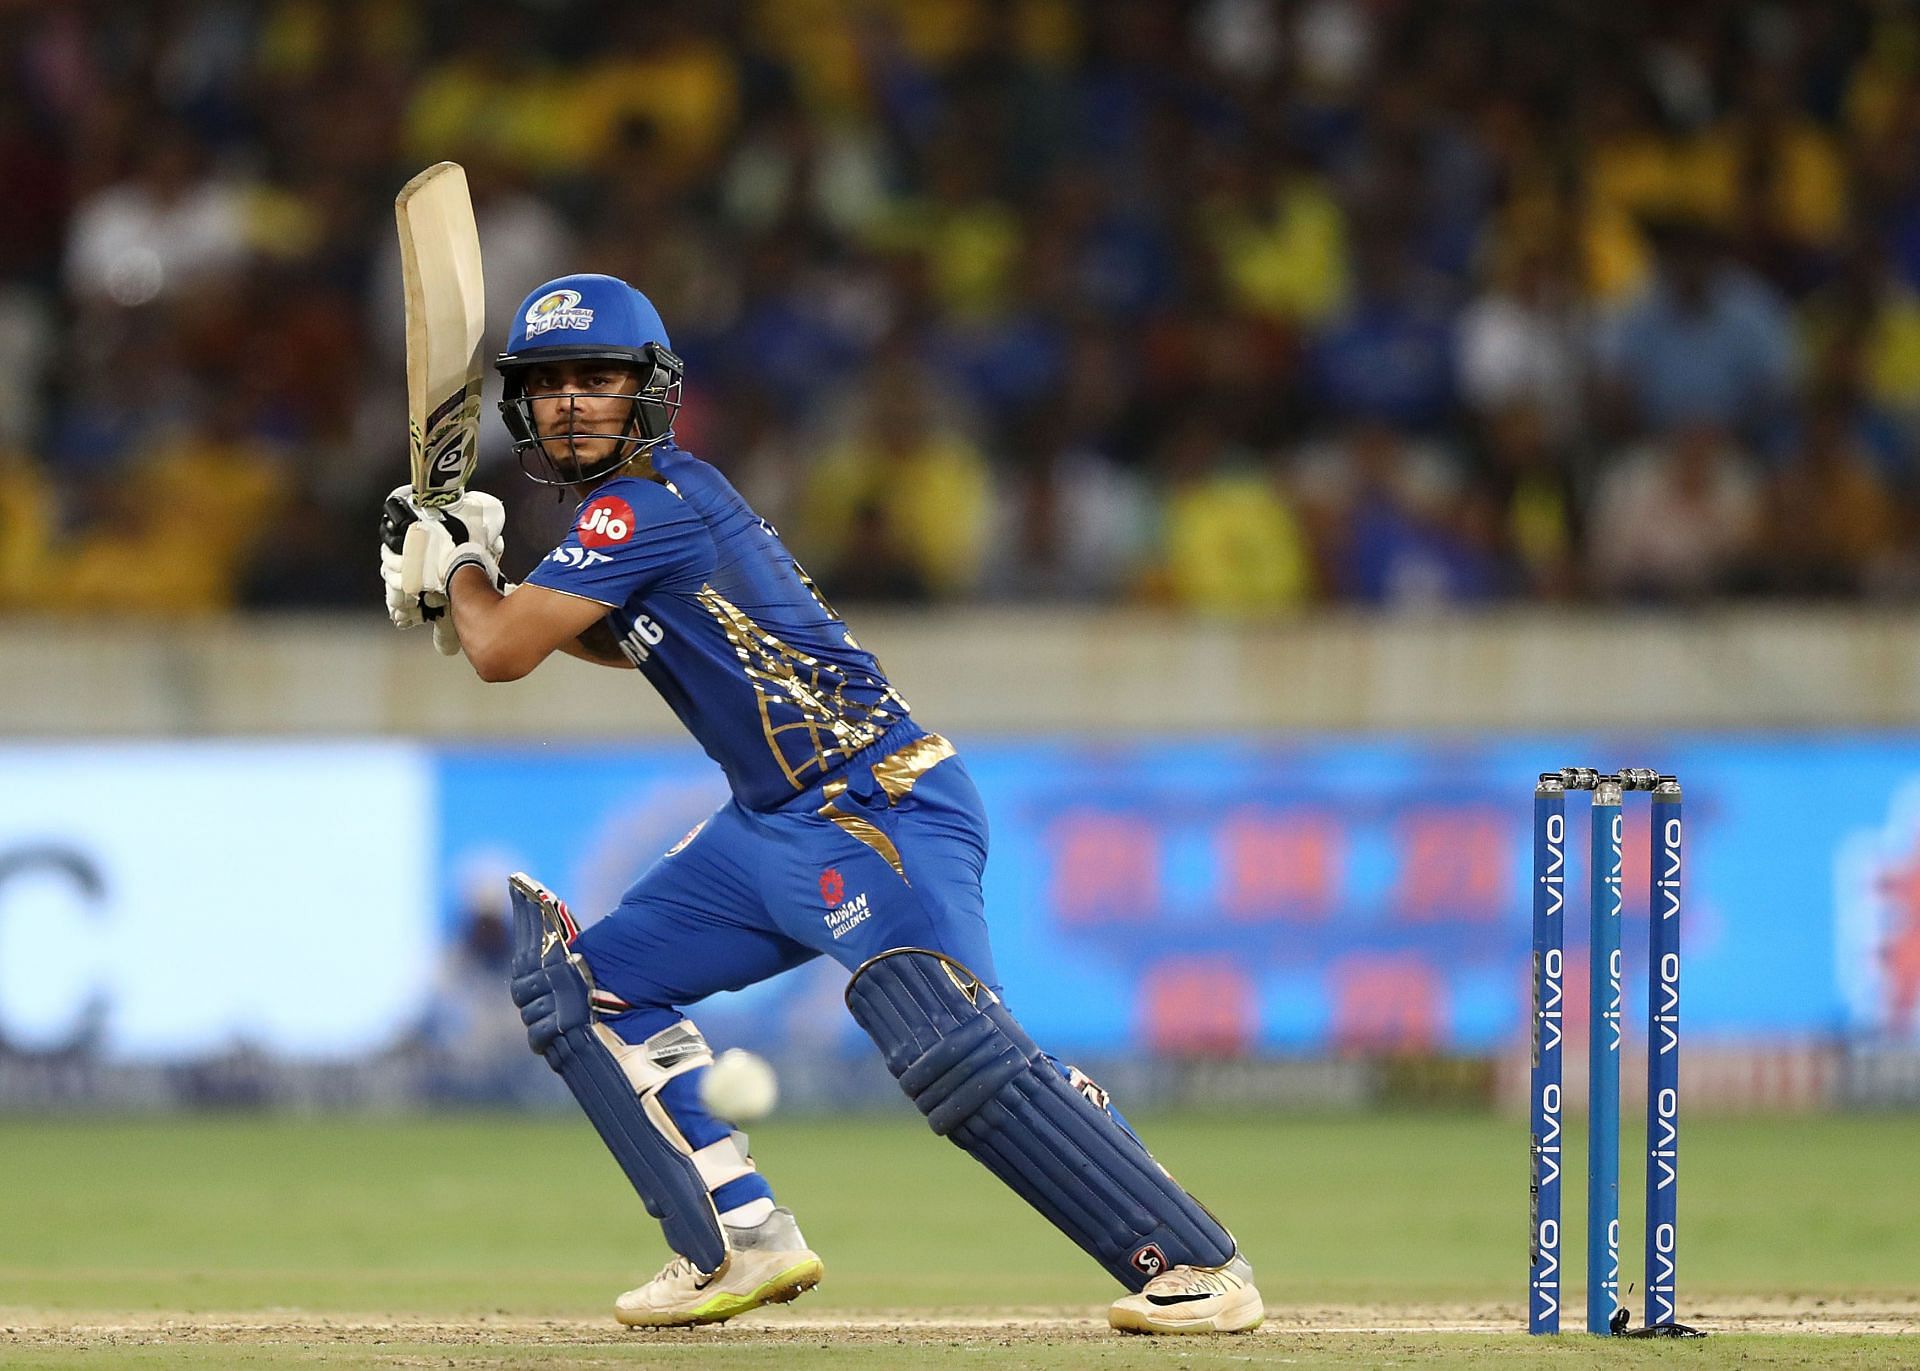 Ishan Kishan will continue playing for the Mumbai Indians in IPL 2022